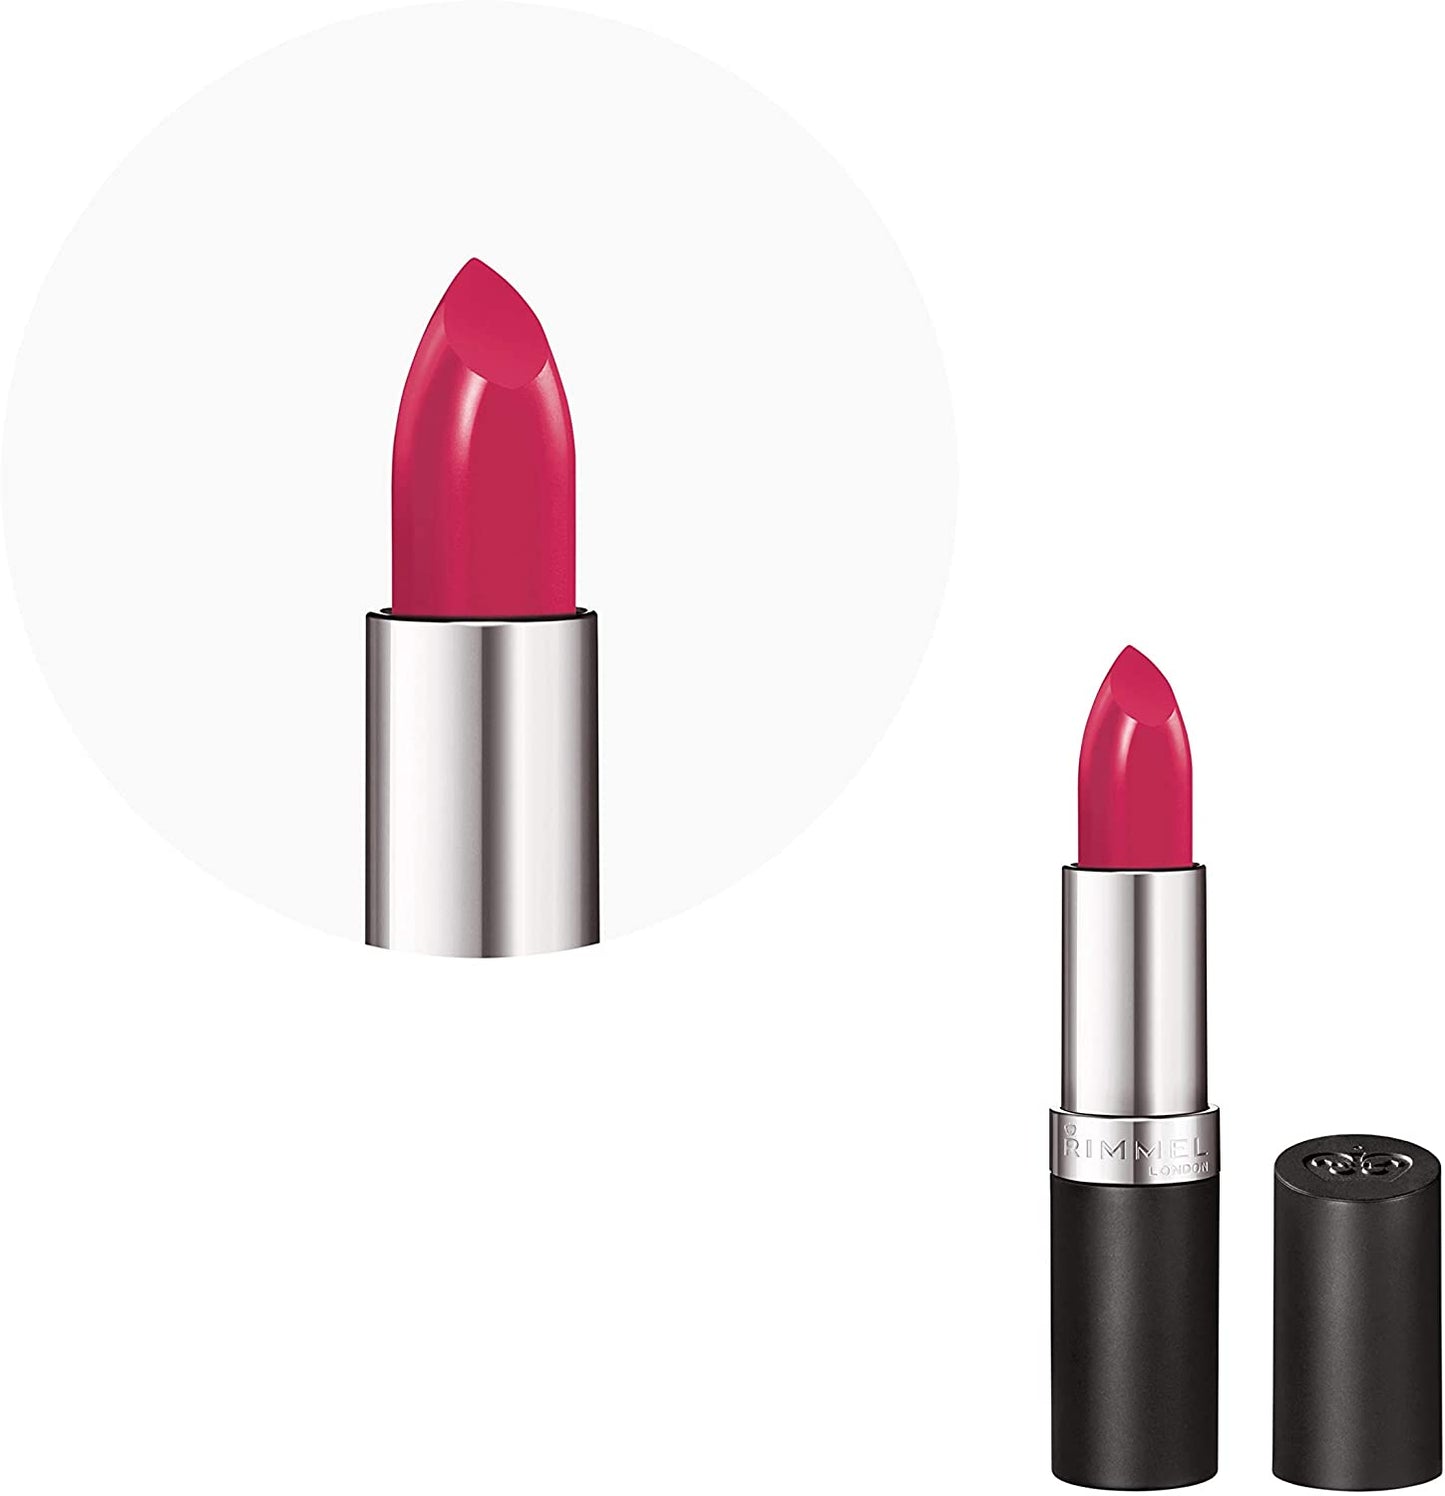 Load image into Gallery viewer, Rimmel London Lasting Finish Lipstick, 5 Rosy Pink, 4g
